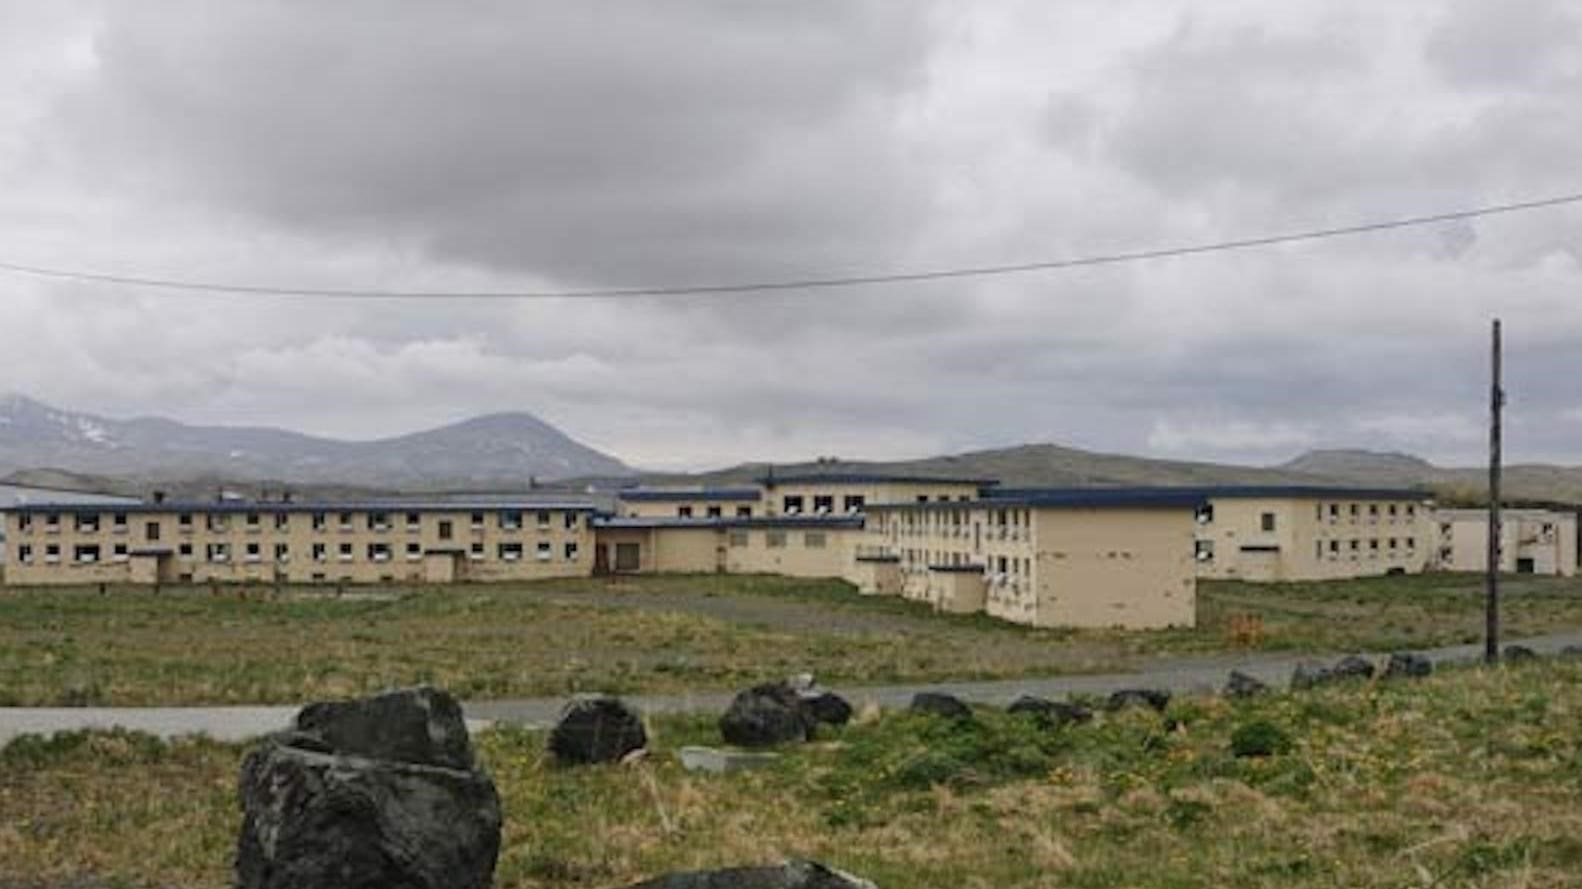 An expansive two story barracks building, on the tundra, with beige paint and a gray roof.